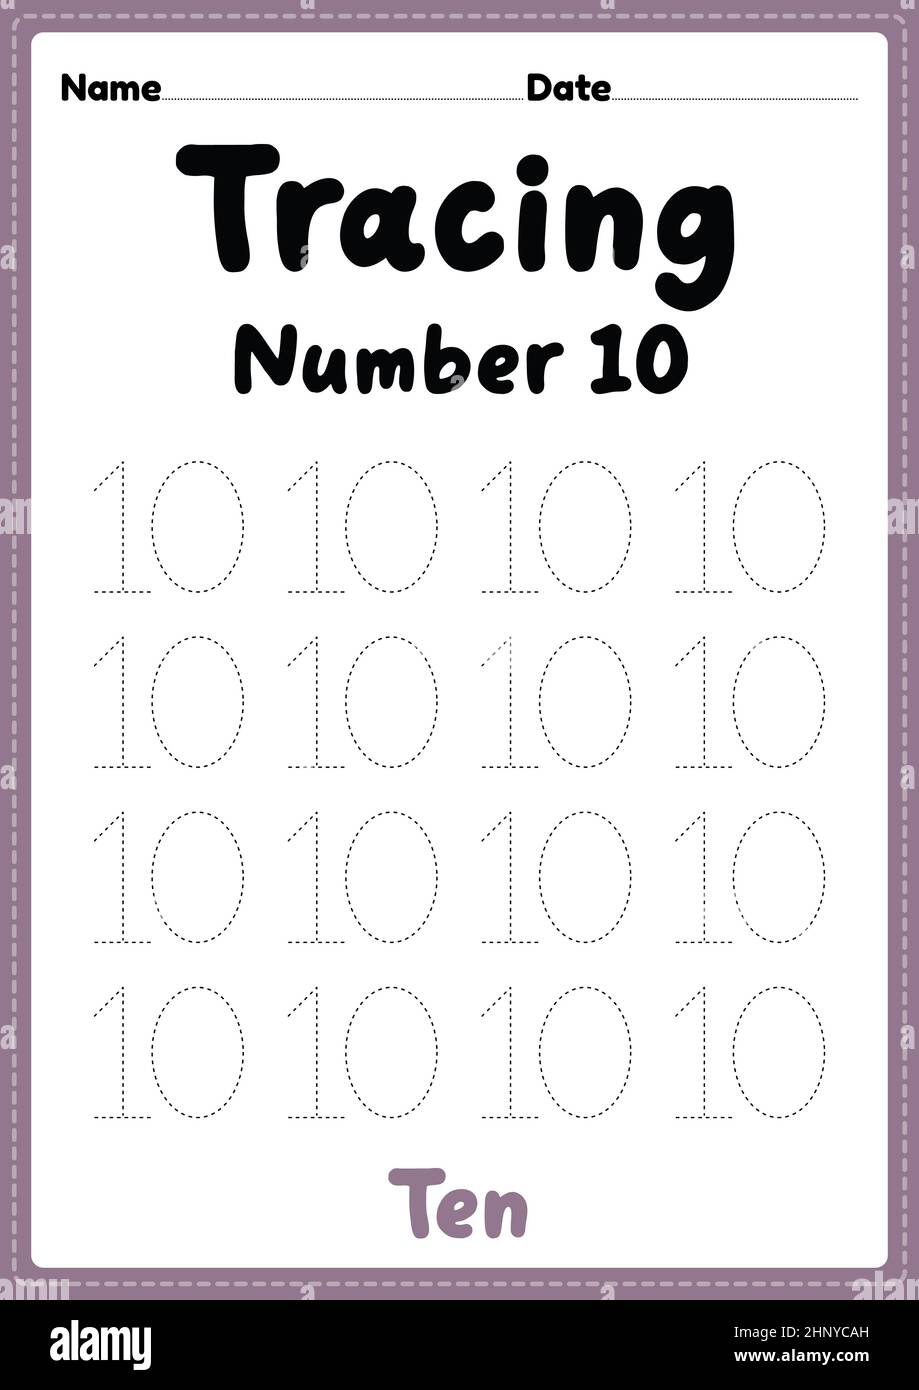 Tracing number 10 worksheet for kindergarten, preschool and Montessori kids for learning numbers and handwriting practice activities. Stock Photo